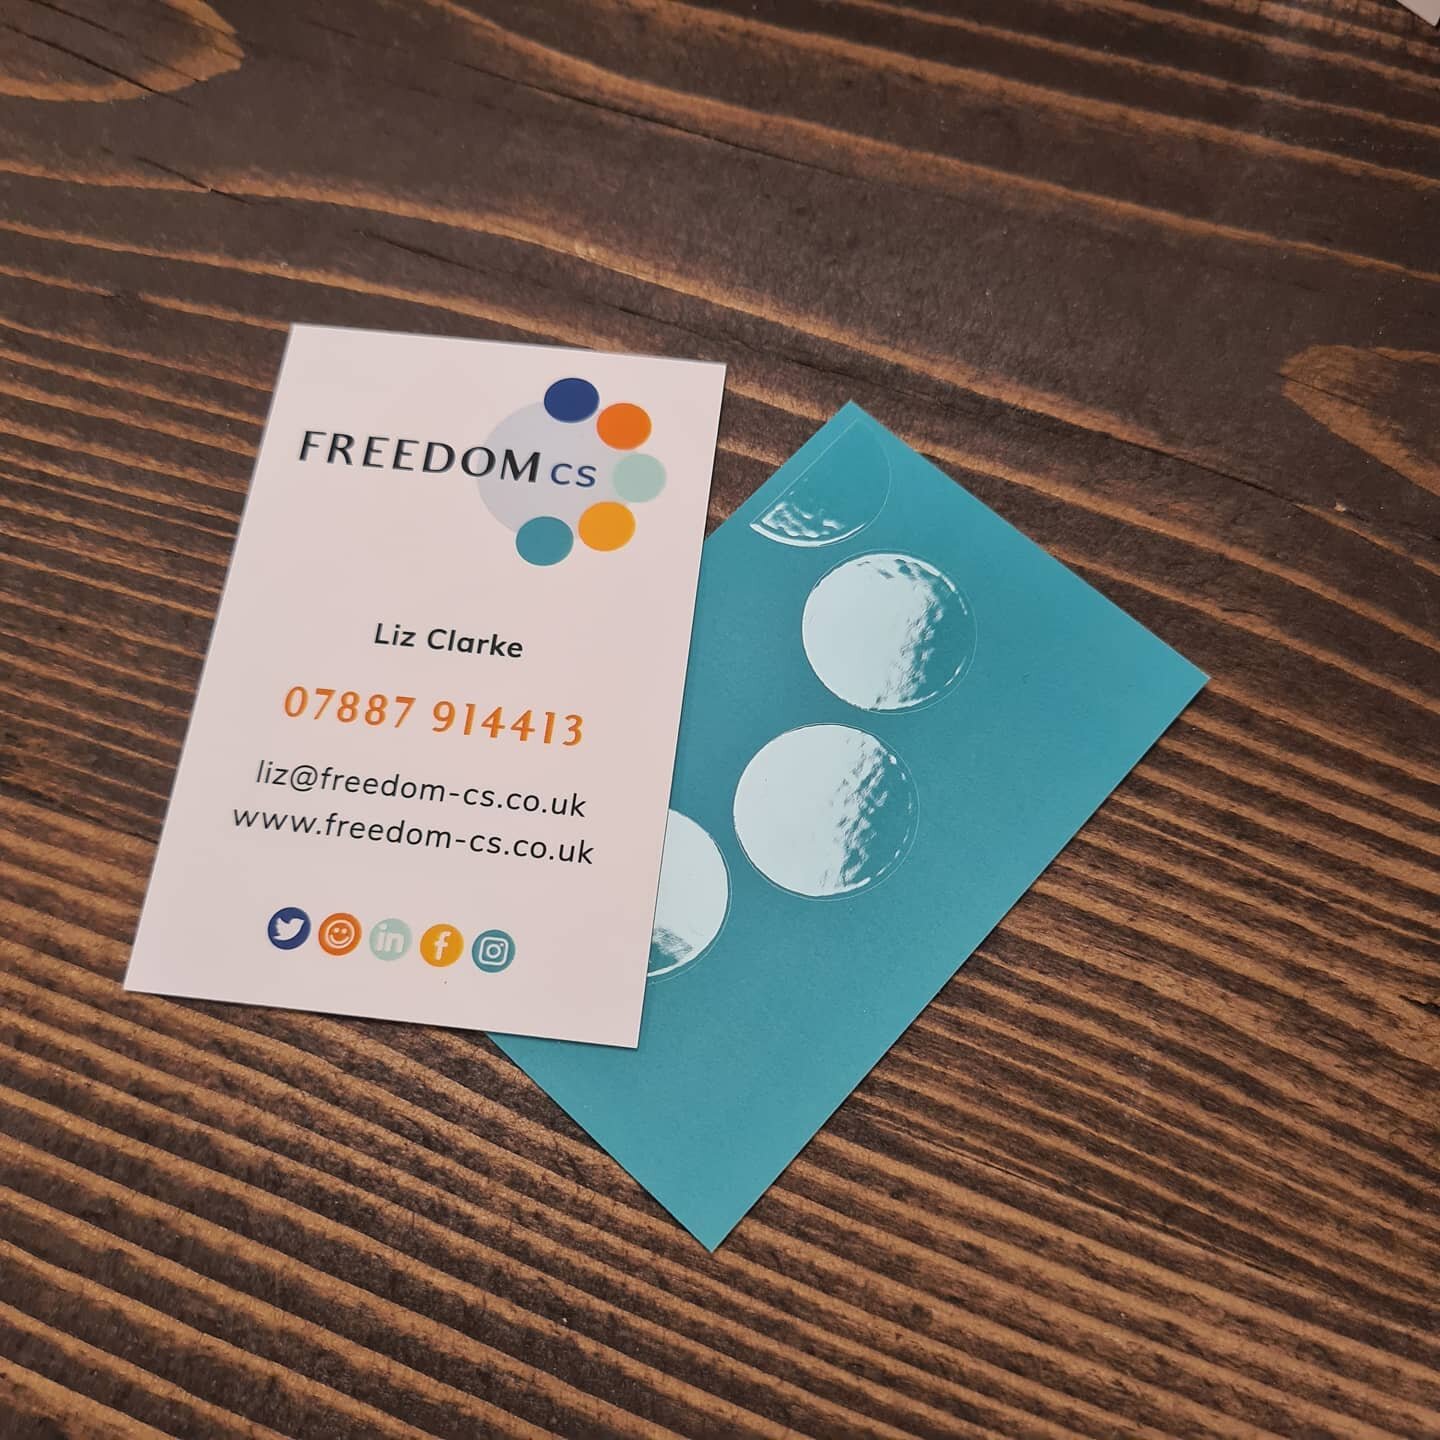 Was a bit rubbish at posting last week - so here's this lovely set of new business cards and notelets for @freedom_content  launching her new branding 😃👏👏👏
Great palette of colours to work with on statement, and then some subtle branding to keep 